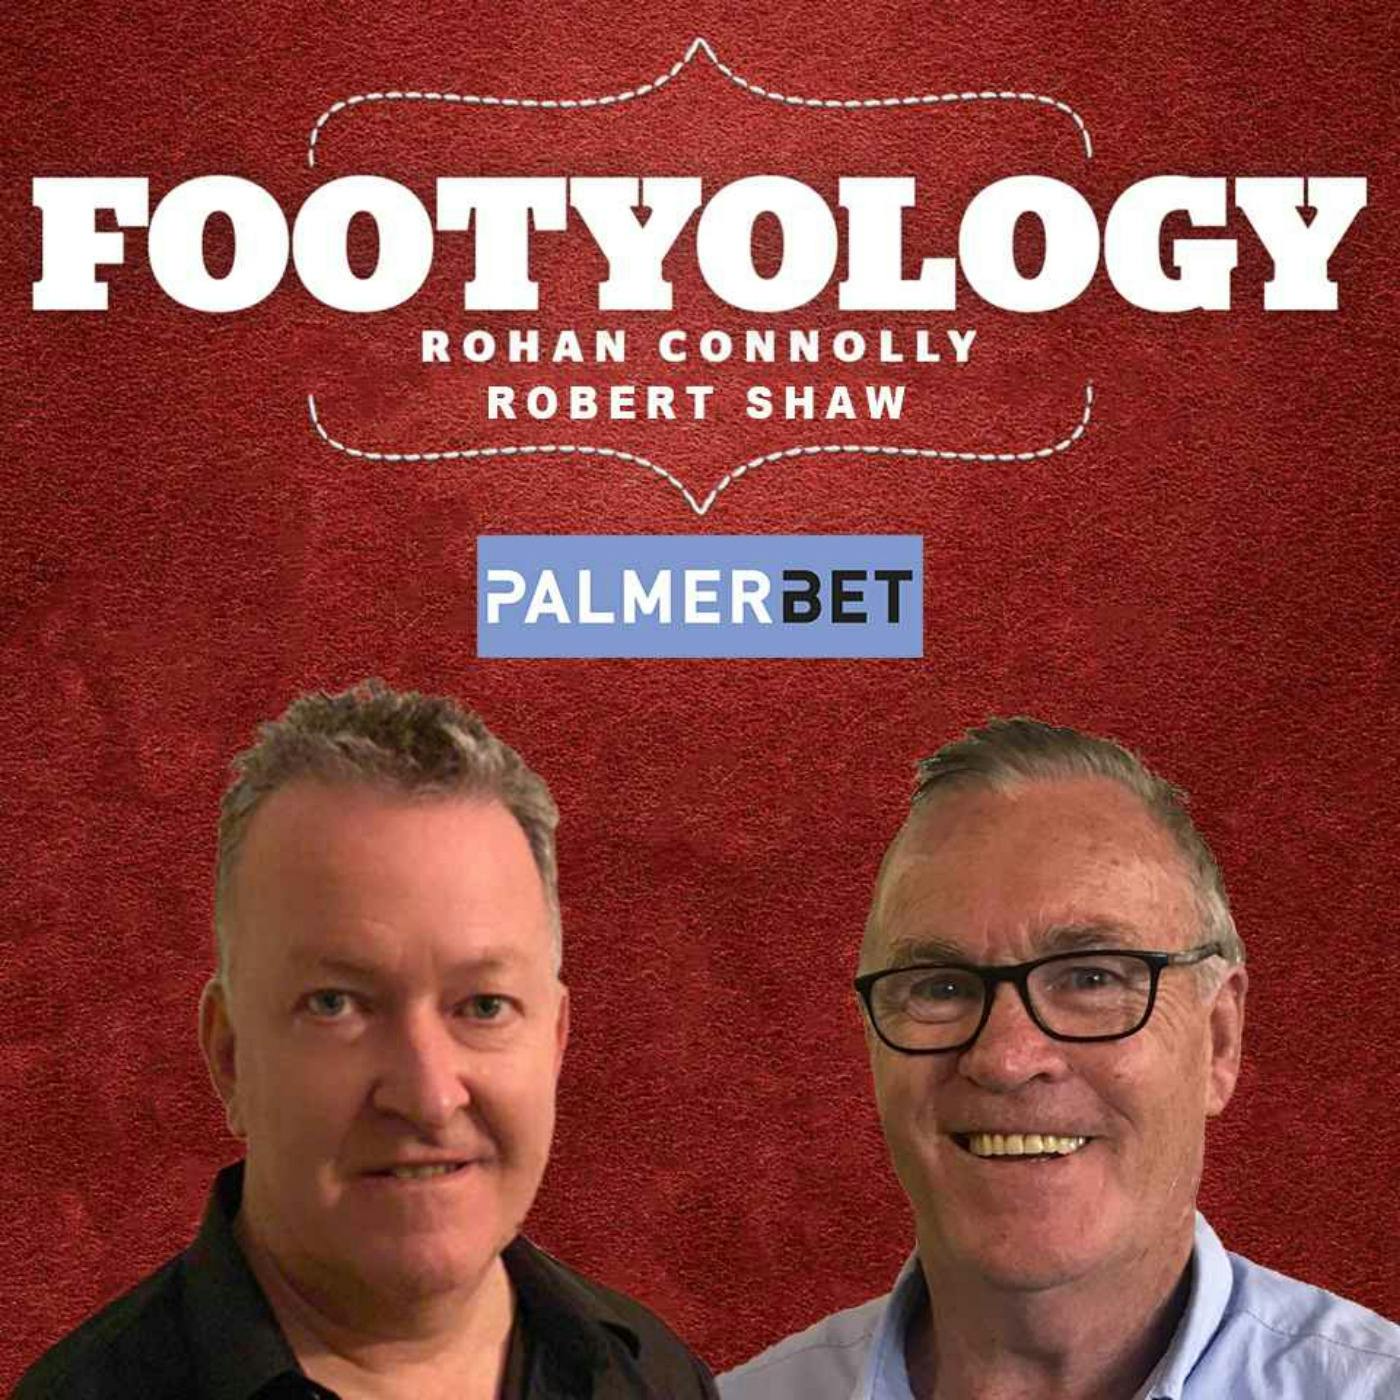 Footyology Podcast - June 5th 2022